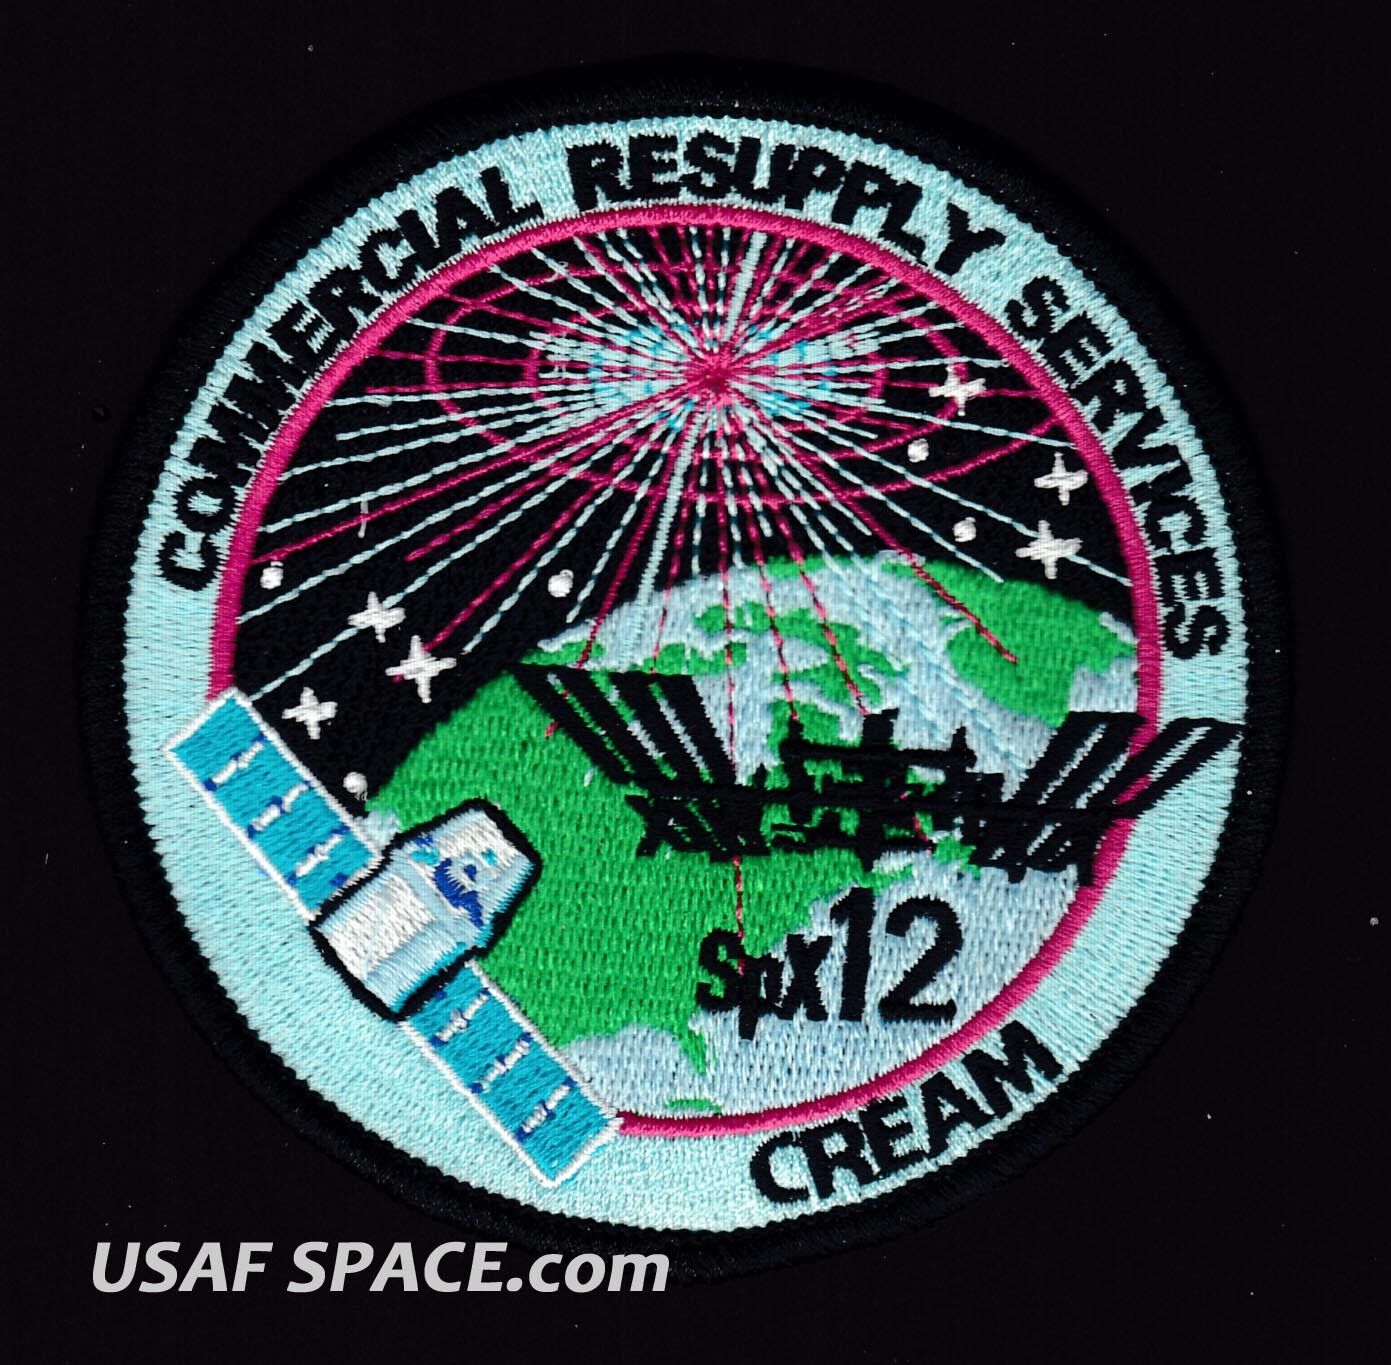 Authentic SPX-12 - SPACEX CRS-12 NASA COMMERCIAL ISS RESUPPLY A-B Emblem PATCH